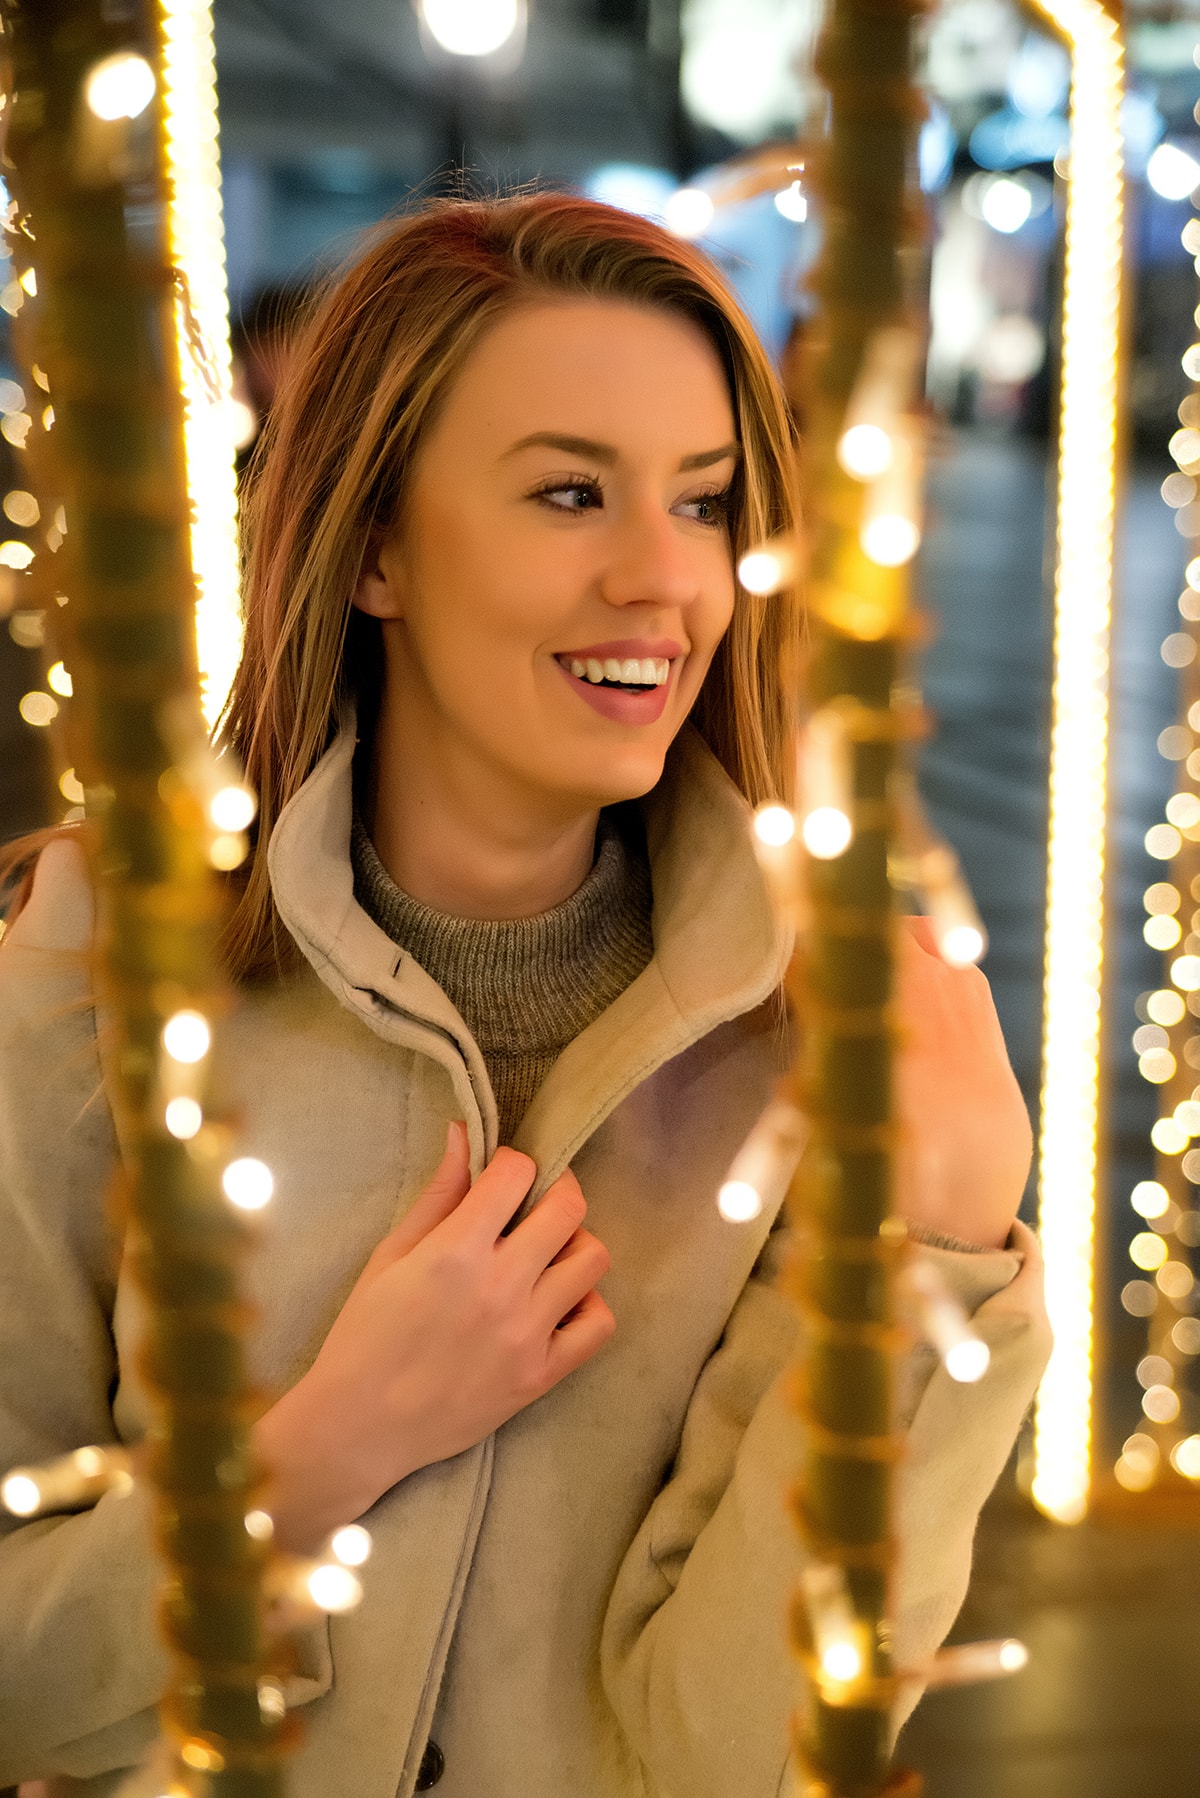 Street portrait of young happy woman on the festive Christmas market at night